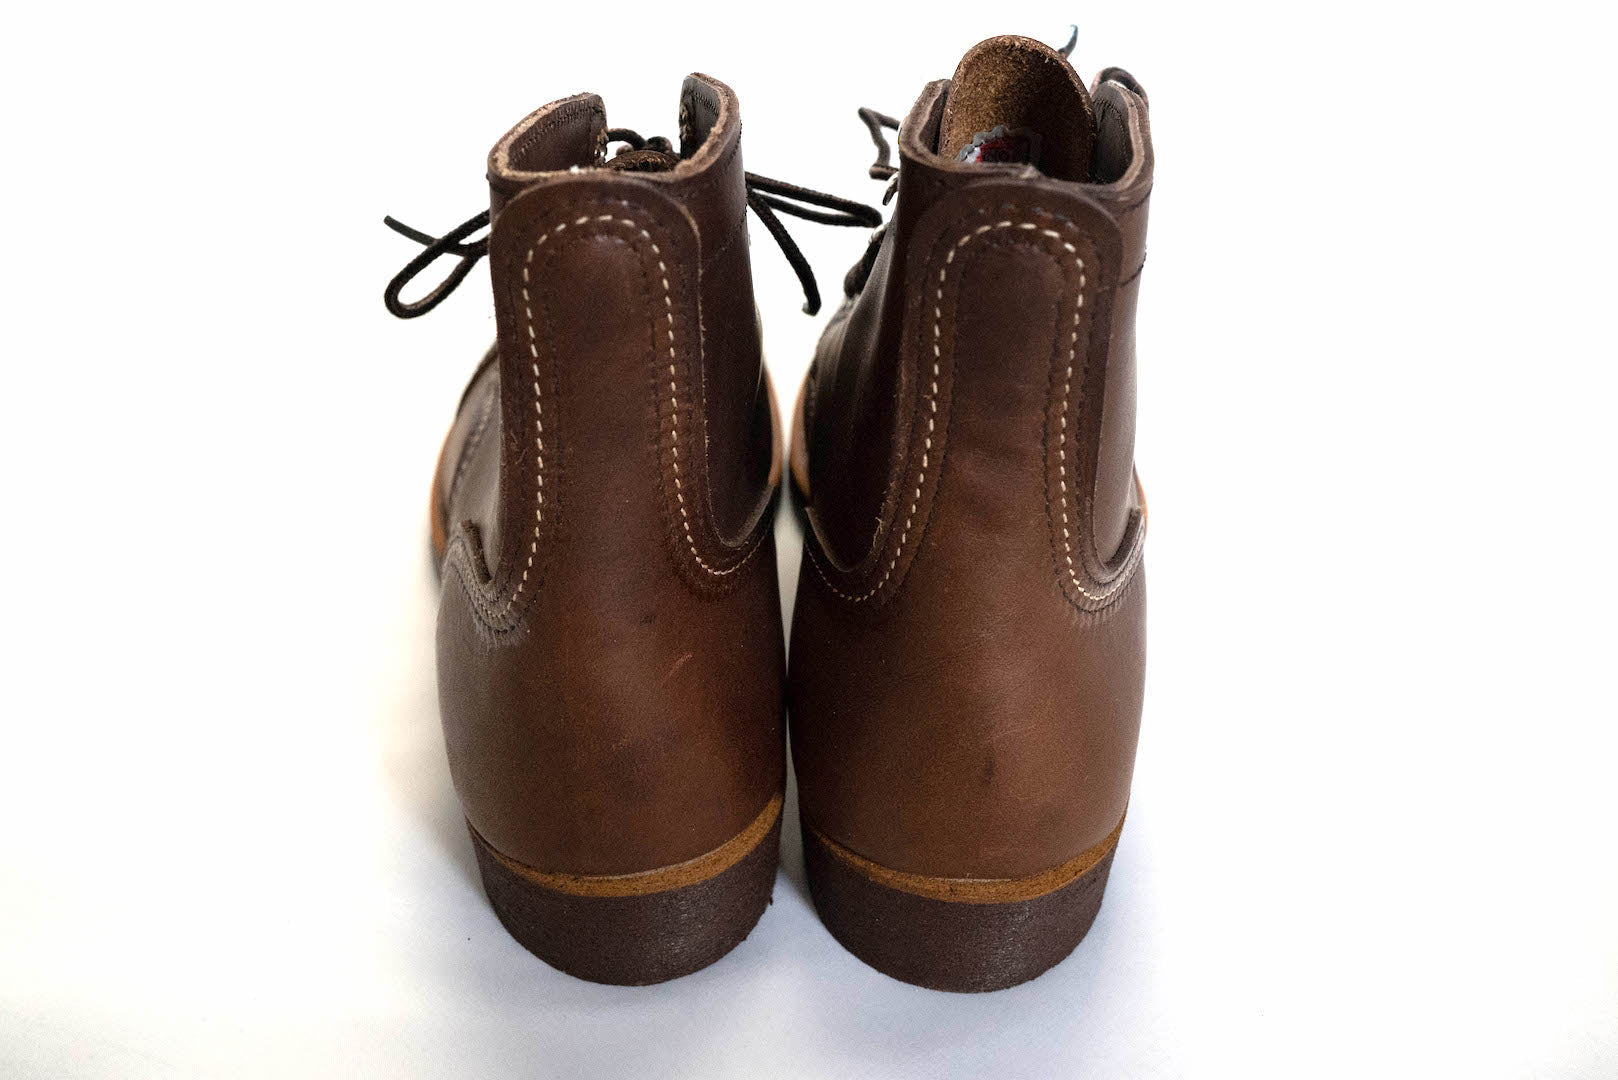 Red Wing Boots 8111